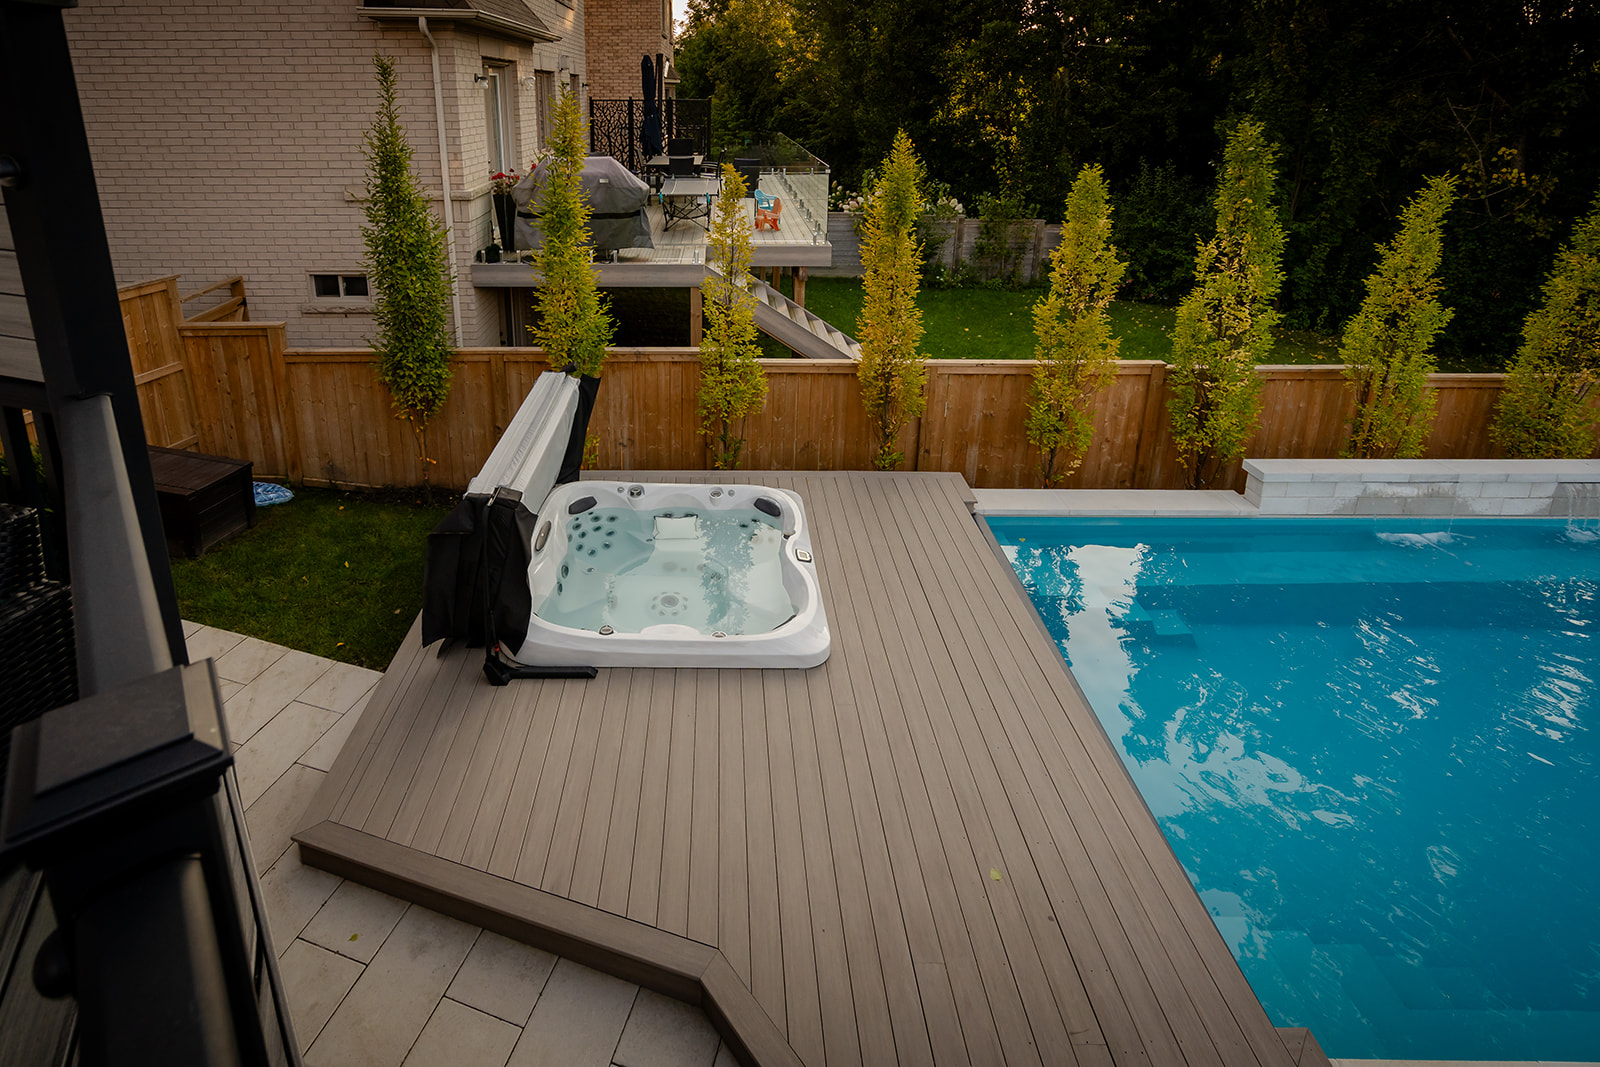 A jacuzzi surrounded by a raised deck and an inground pool on the right.